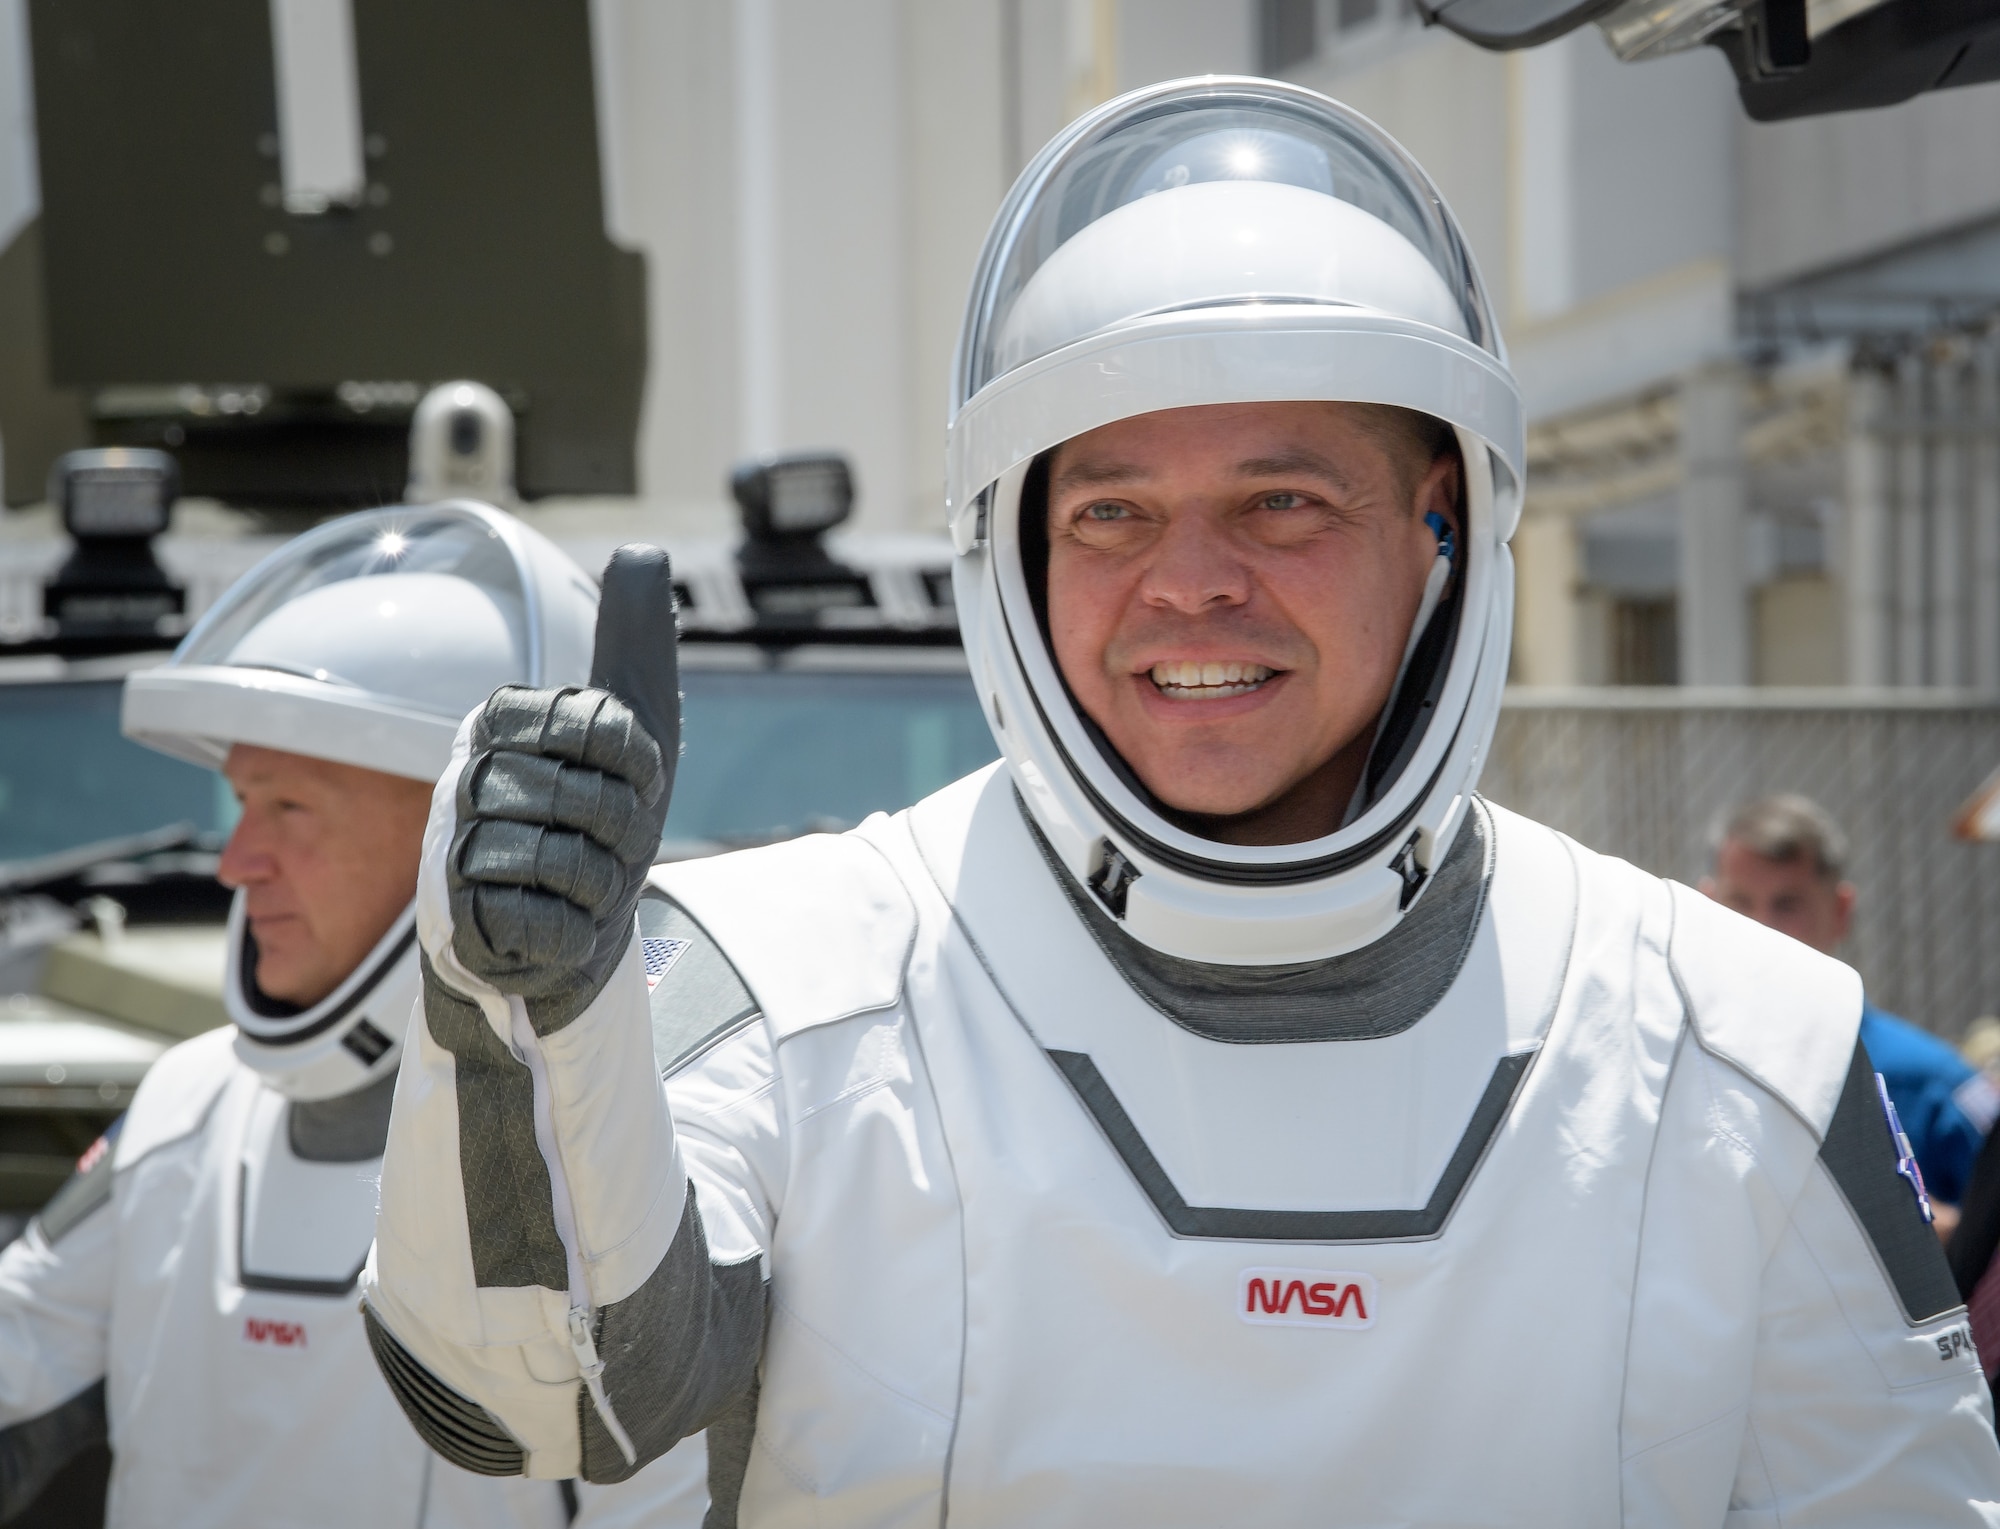 NASA astronauts Robert Behnken, foreground, and Douglas Hurley, wearing SpaceX spacesuits, are seen as they depart the Neil A. Armstrong Operations and Checkout Building for Launch Complex 39A to board the SpaceX Crew Dragon spacecraft for the Demo-2 mission launch, Saturday, May 30, 2020, at NASA’s Kennedy Space Center in Florida. NASA’s SpaceX Demo-2 mission is the first launch with astronauts of the SpaceX Crew Dragon spacecraft and Falcon 9 rocket to the International Space Station as part of the agency’s Commercial Crew Program. The test flight serves as an end-to-end demonstration of SpaceX’s crew ransportation system. Behnken and Hurley are scheduled to launch at 3:22 p.m. EDT on Saturday, May 30, from Launch Complex 39A at the Kennedy Space Center. A new era of human spaceflight is set to begin as American astronauts once again launch on an American rocket from American soil to low-Earth orbit for the first time since the conclusion of the Space Shuttle Program in 2011.  Photo Credit: (NASA/Bill Ingalls)